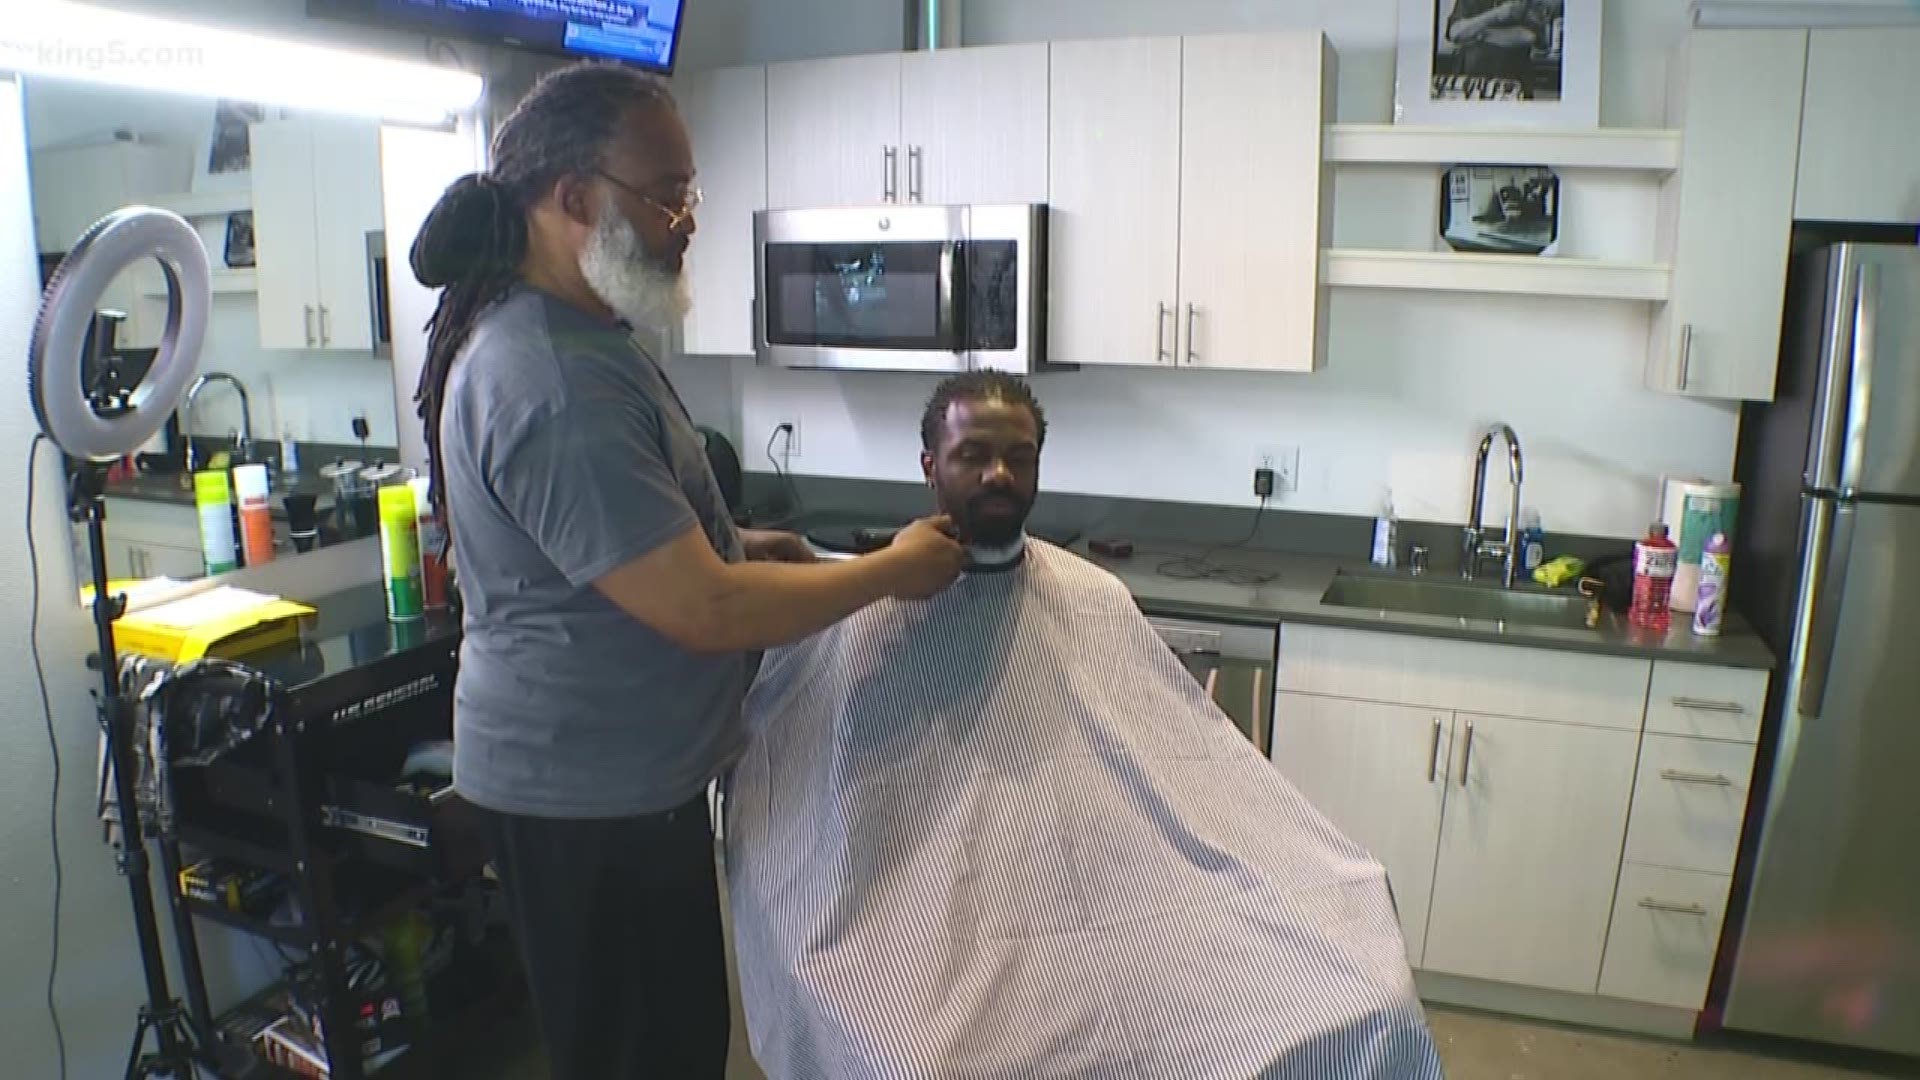 A Seattle University program is helping small businesses survive the rapid gentrification of their neighborhood. The effort is designed to save longtime shops, which otherwise would be forced out as developers move in. Here's KING 5's Ted Land.